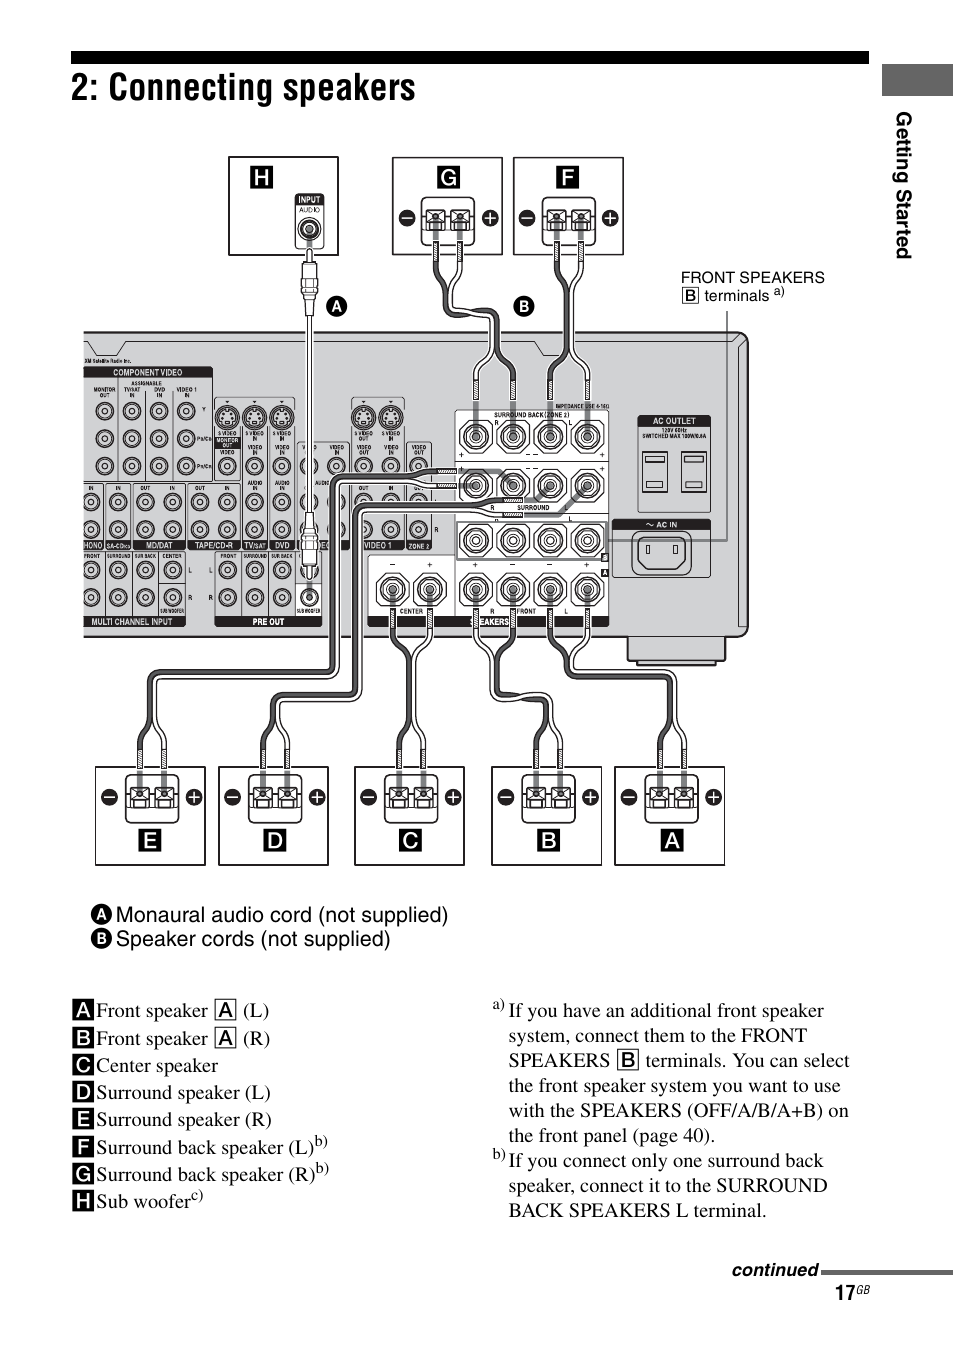 Connecting speakers, E 17 | Sony STR-DG1000 User Manual | Page 17 / 123